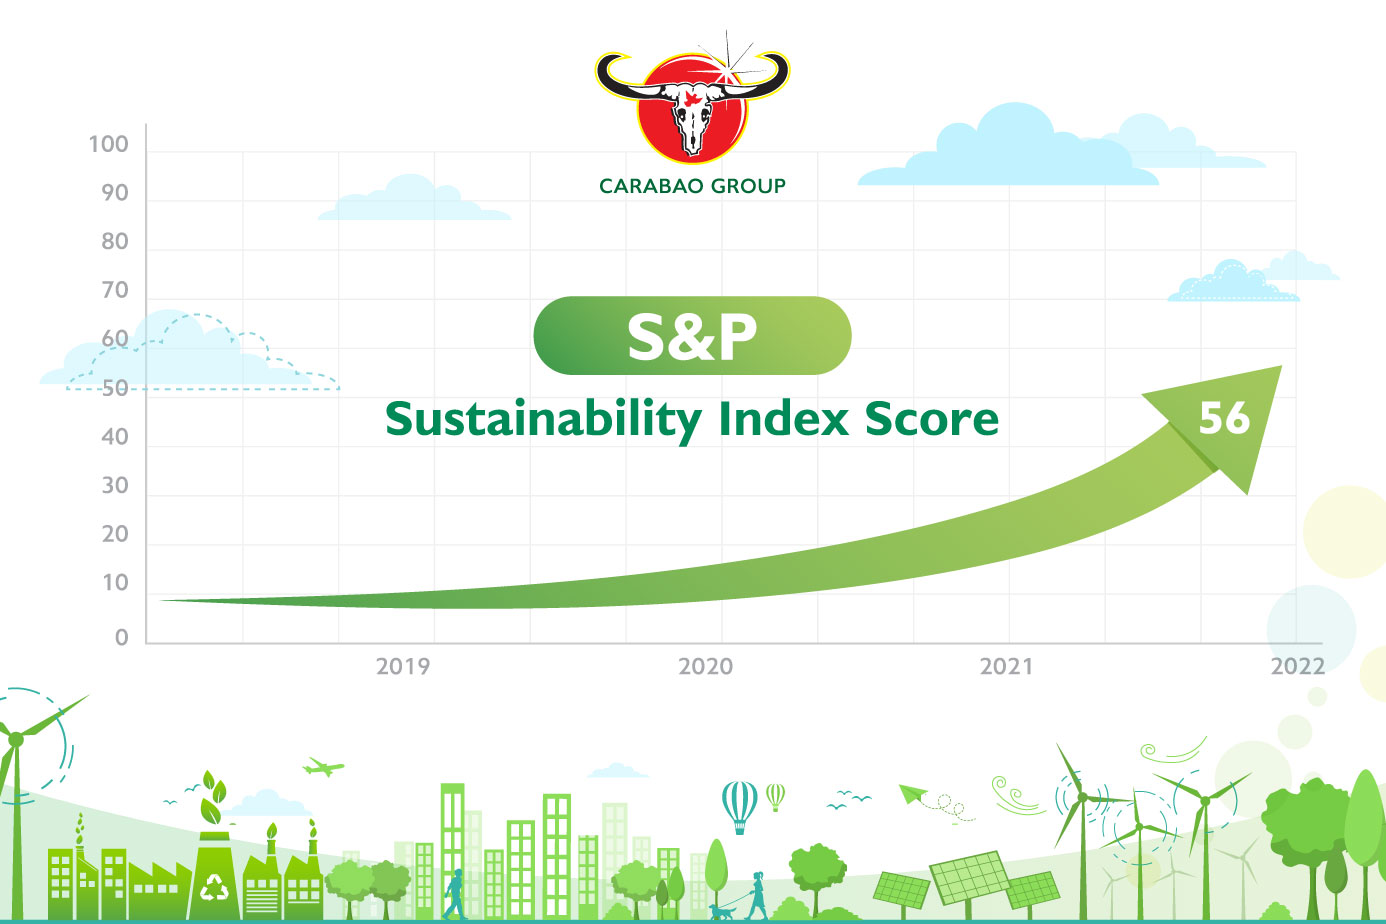 Carabao Group Public Company Limited (CBG) participated in S&P ESG Index Group B for the first time with significant score improvements from the previous year